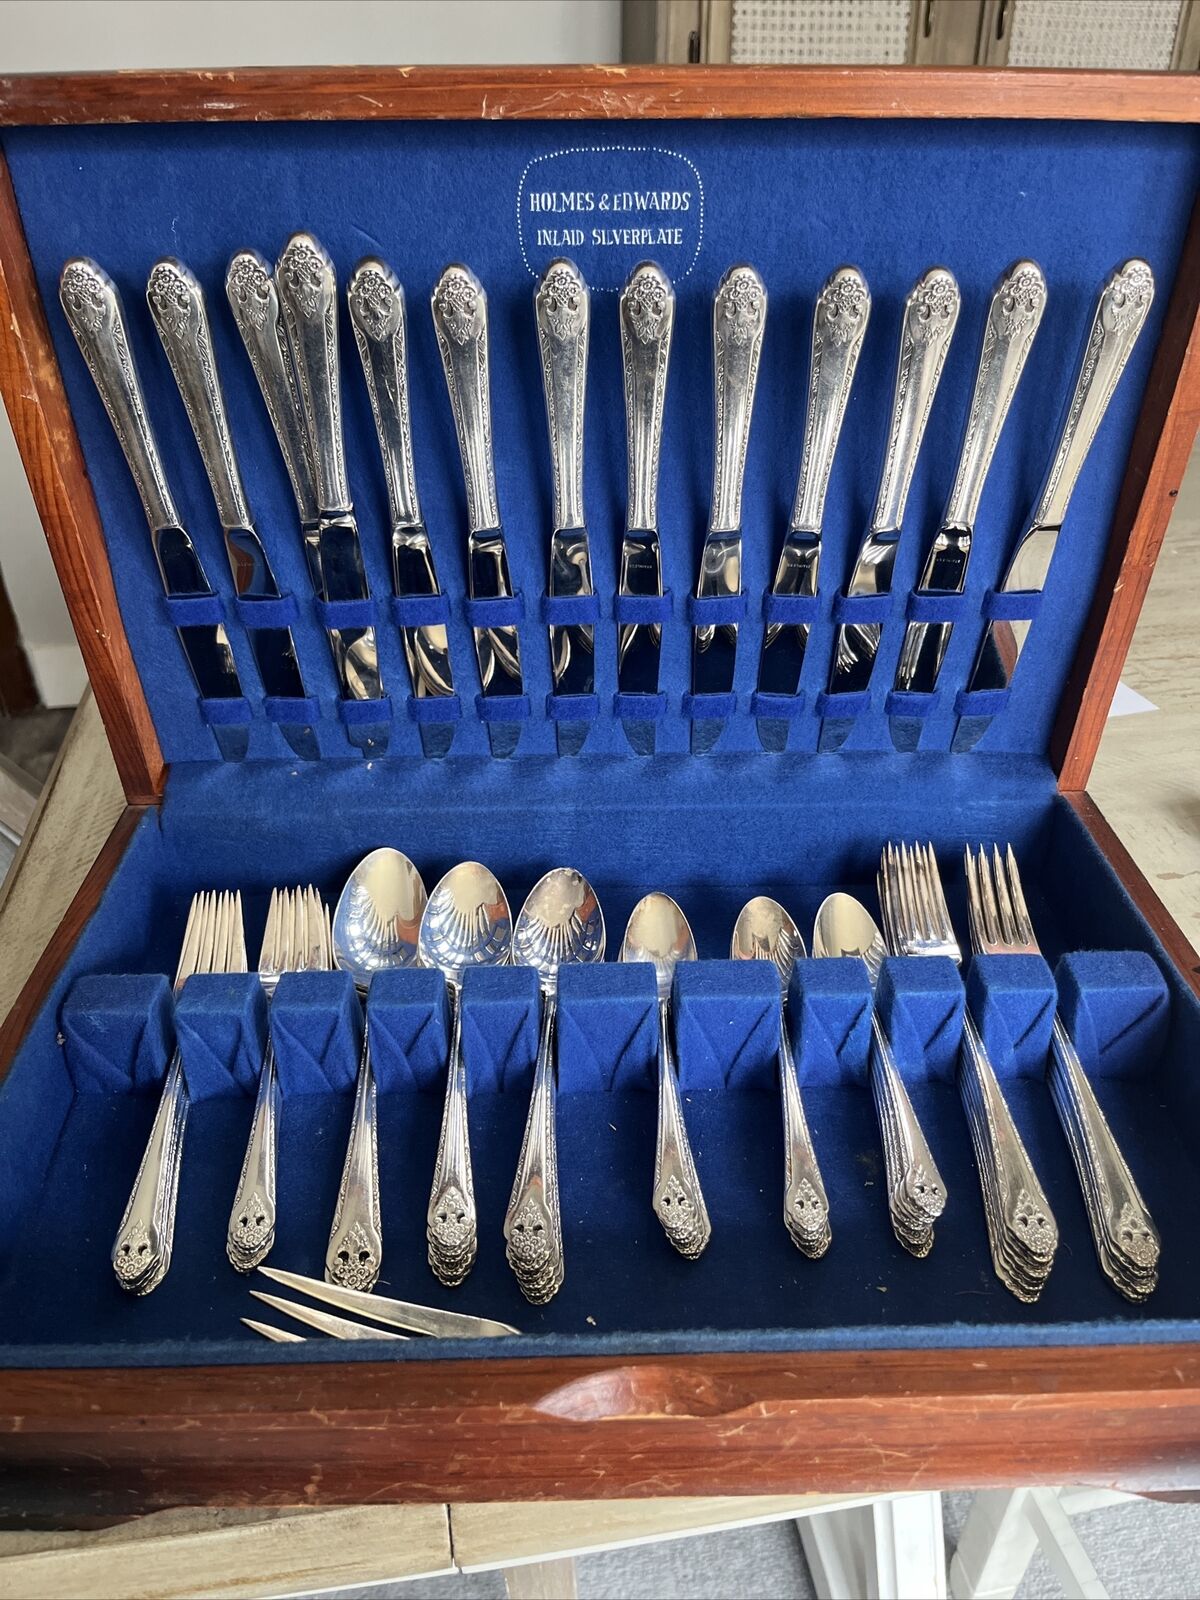 holmes and edwards inlaid silverware